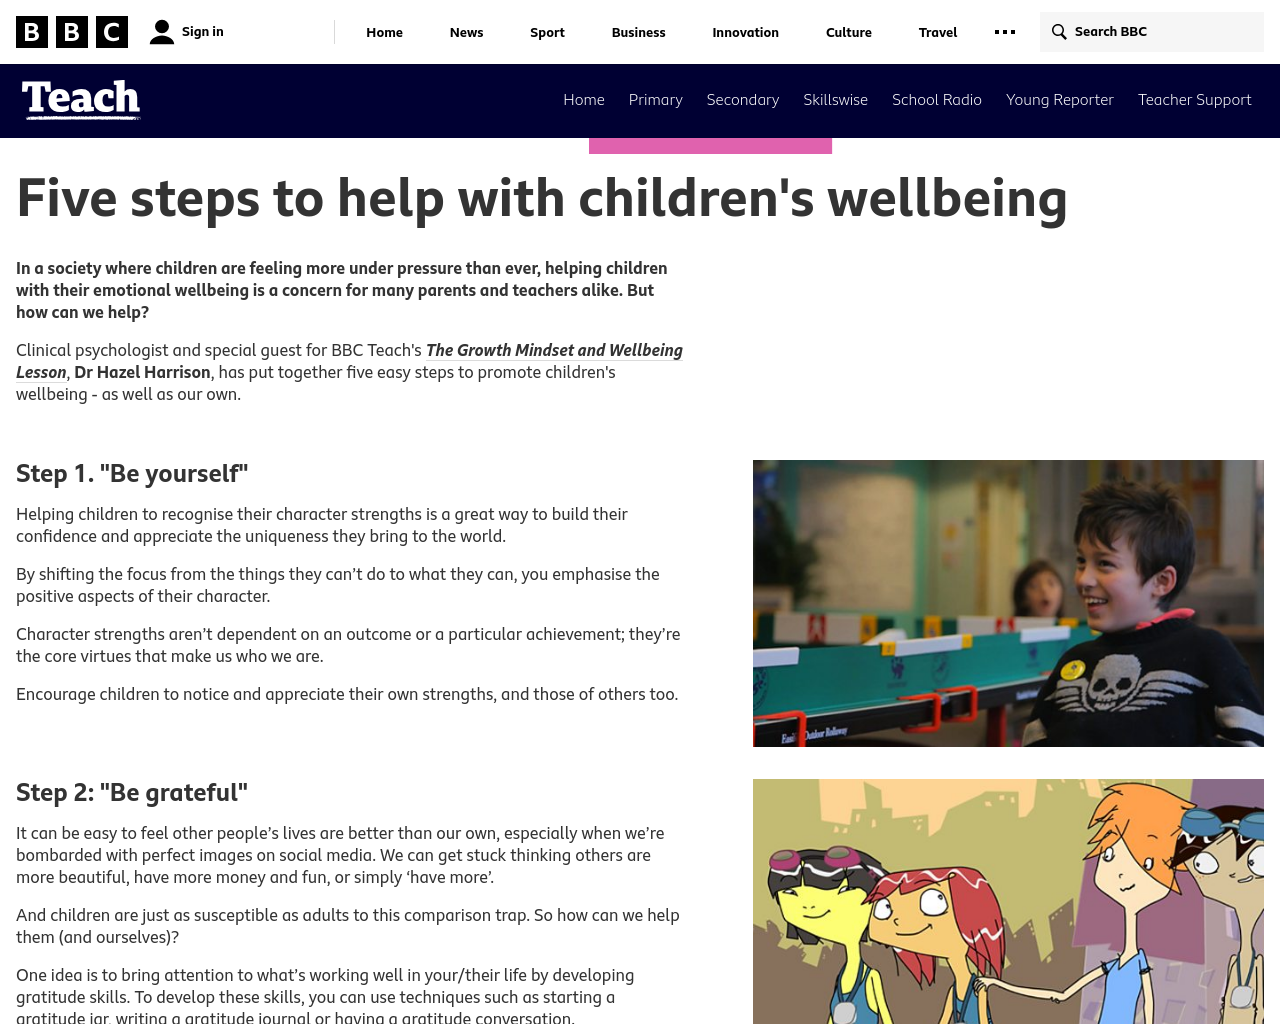 5 Steps for children's wellbeing